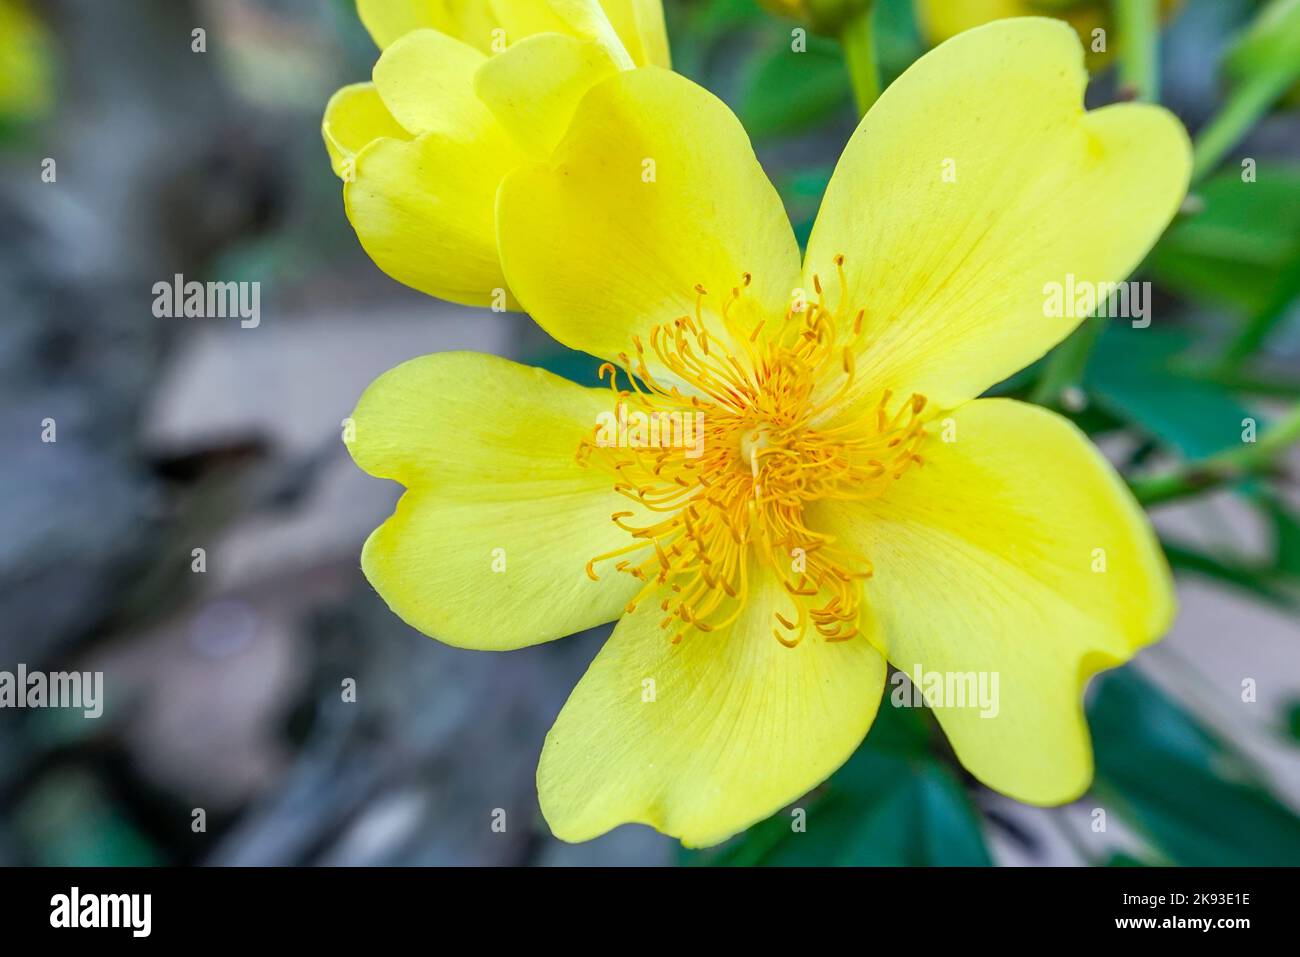 Yellow flower in springtime, buttercup tree blossom bright in golden in spring flower garden Stock Photo